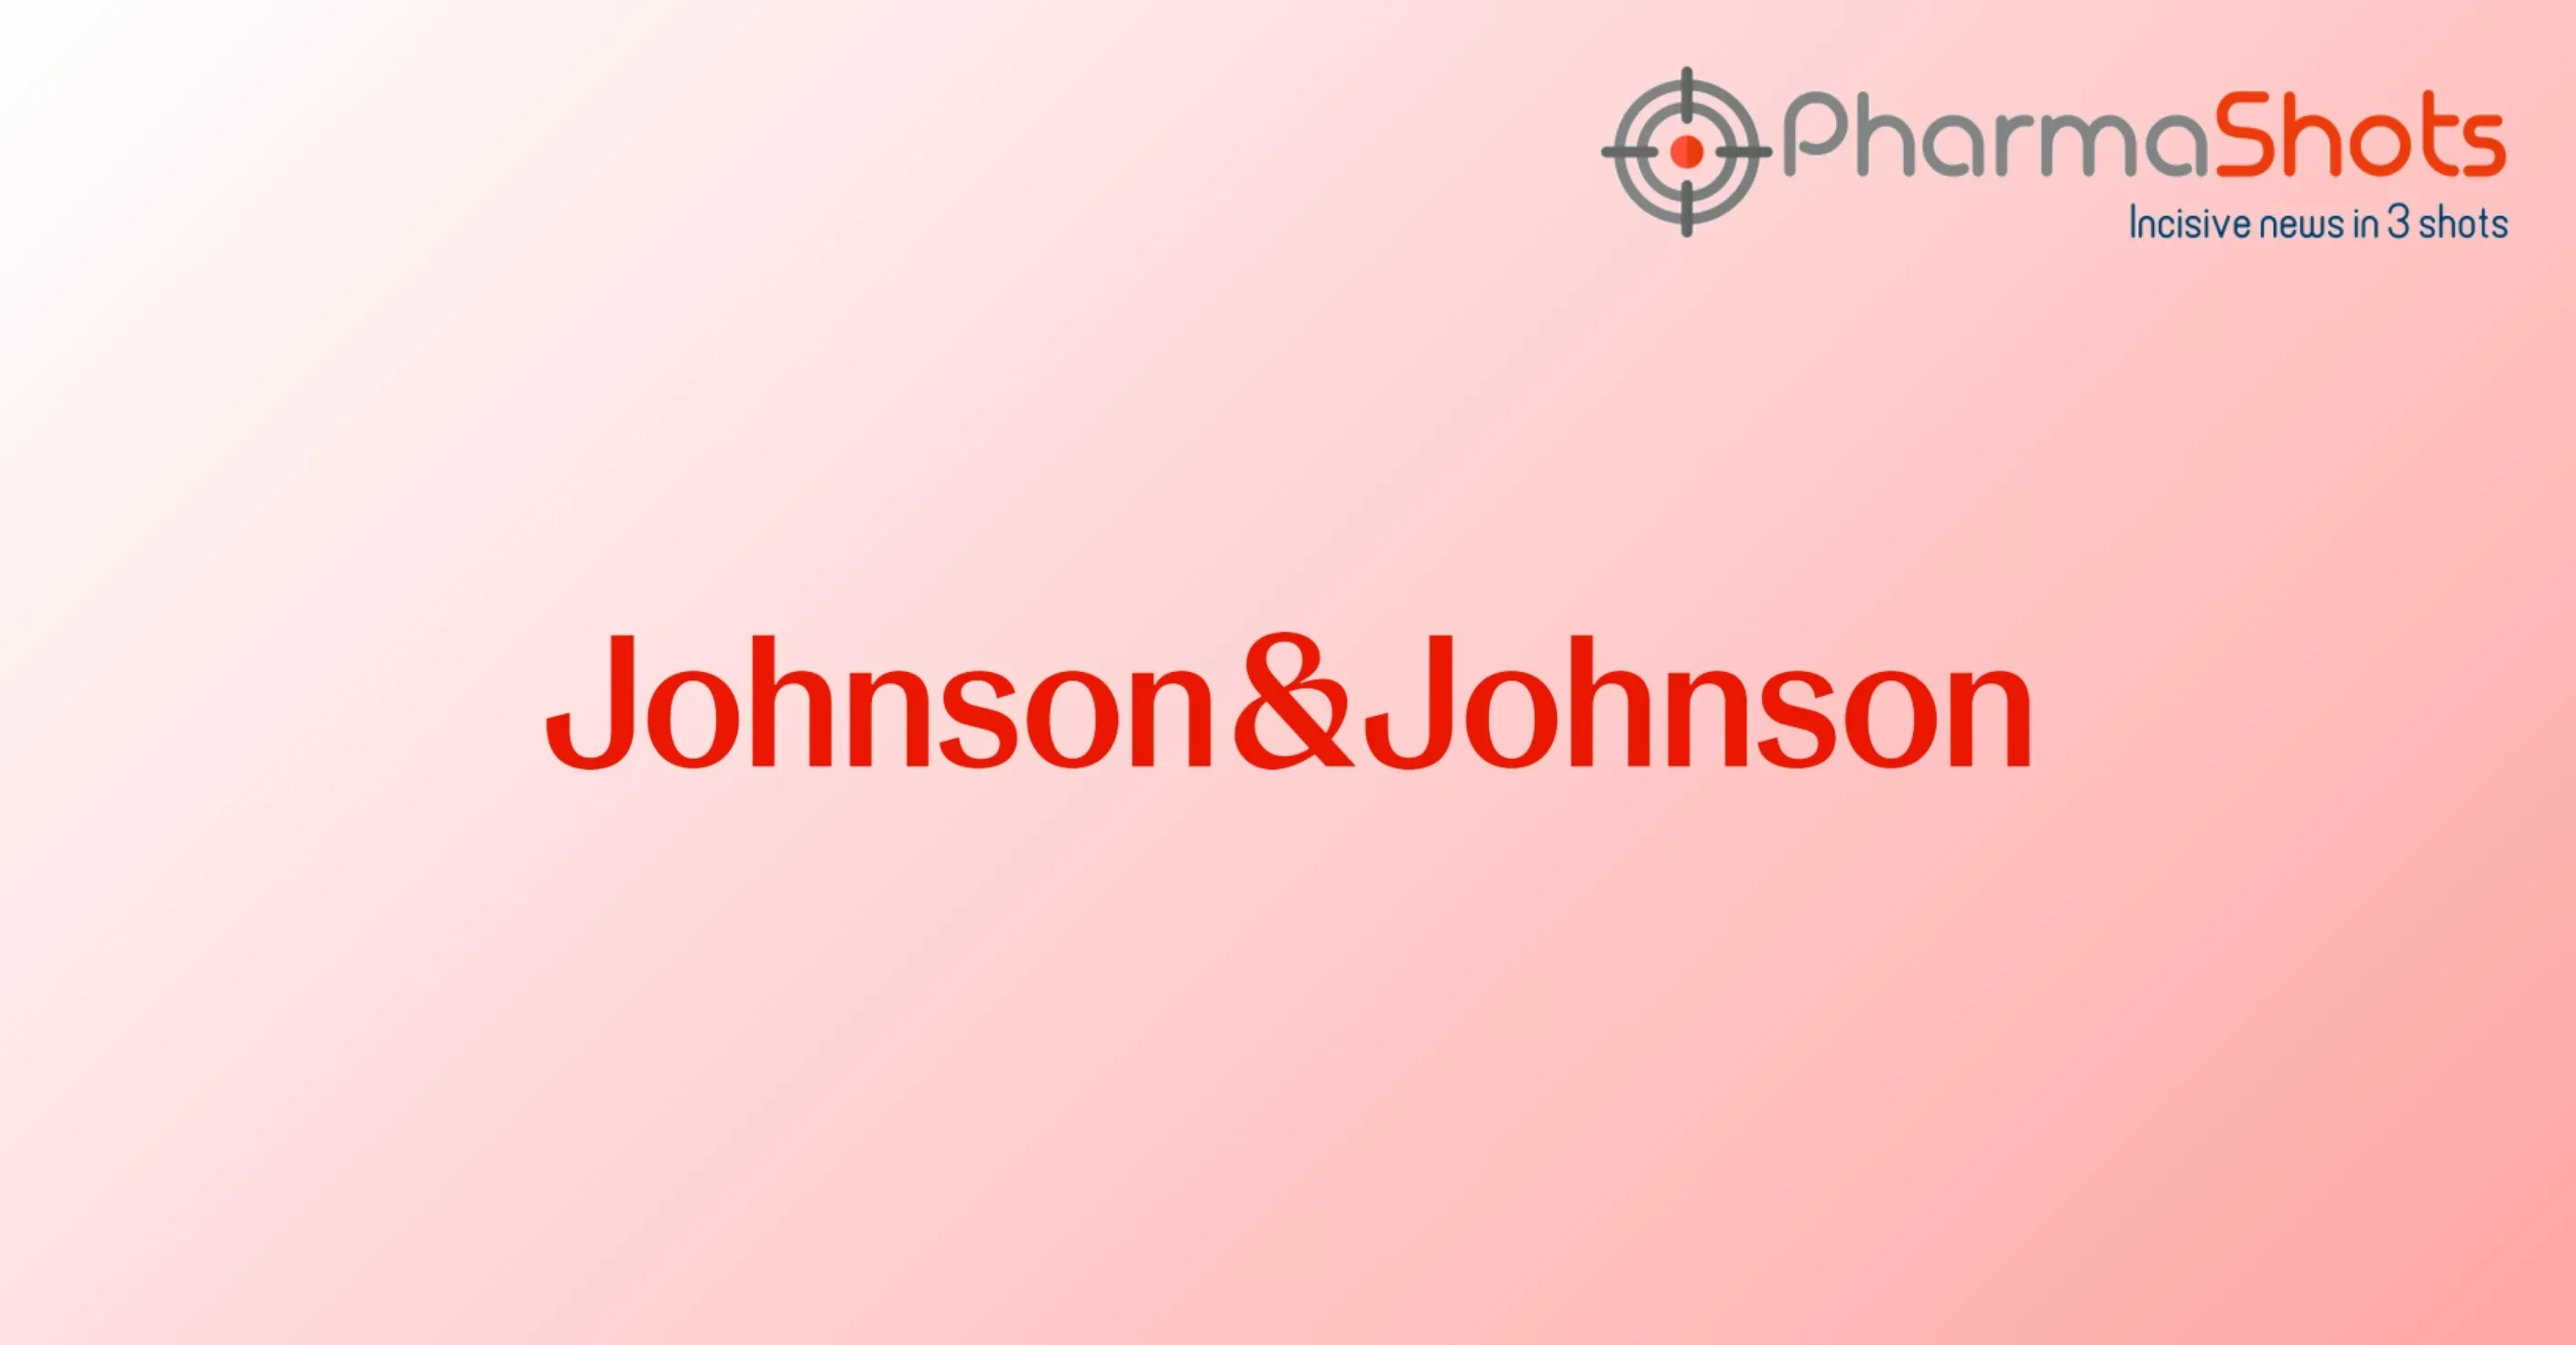 Johnson & Johnson Reports Type II Variation Application Submission to the EMA for Darzalex as a Treatment of Multiple Myeloma